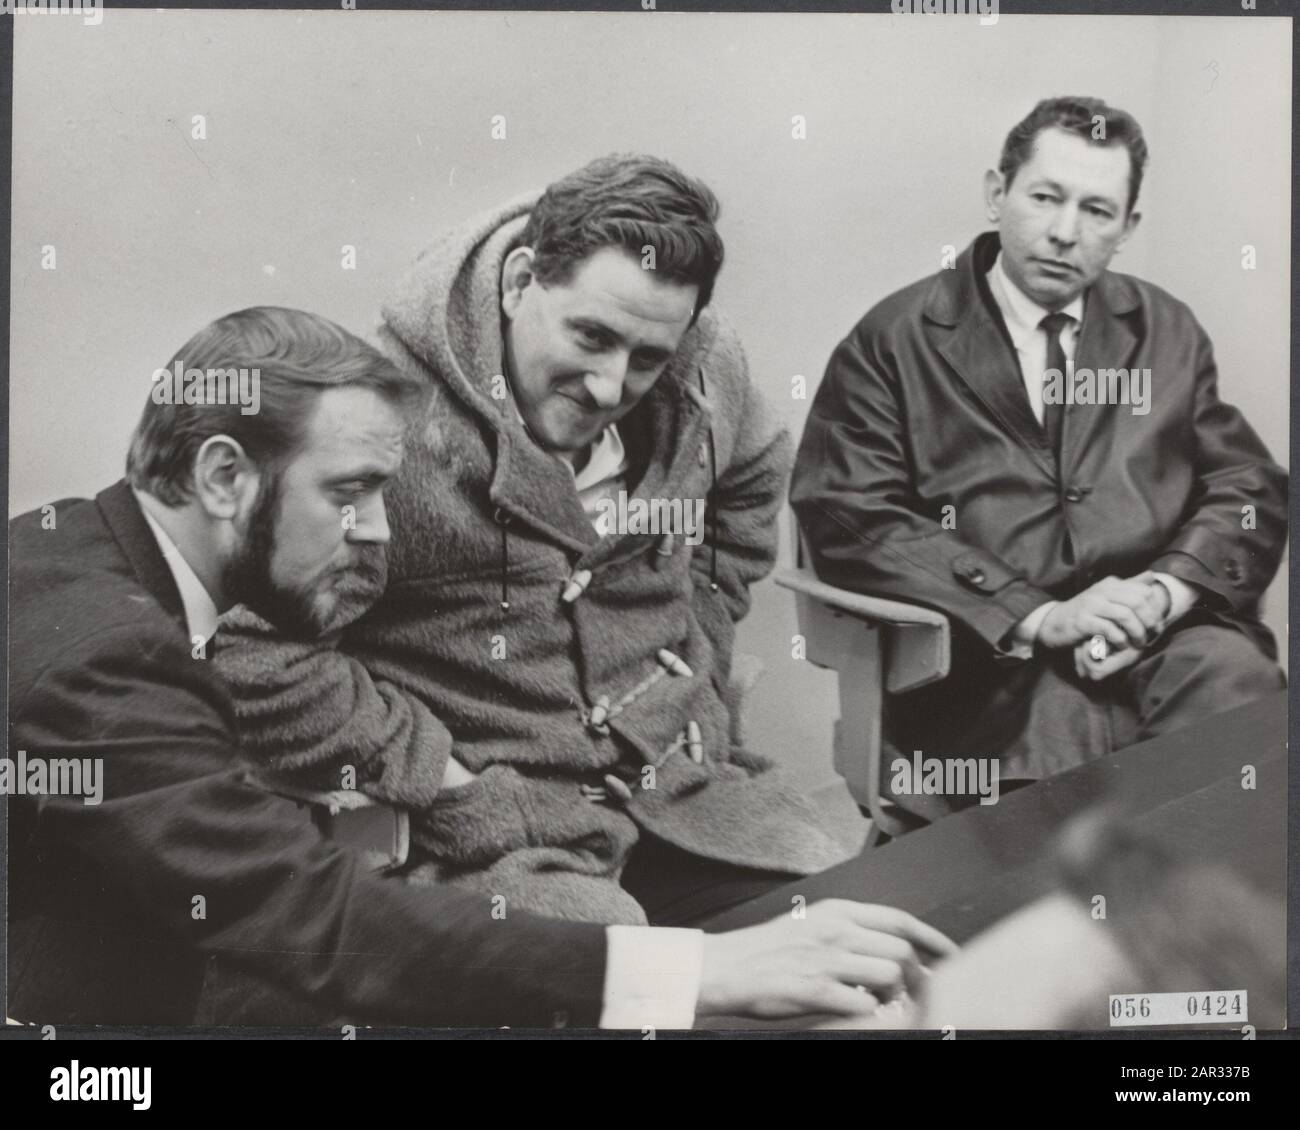 press conferences, crew, airplanes, smuggling, weapons, Burger, Consolino Date: 17 February 1965 Location: Noord-Holland, Schiphol Keywords: crew, press conferences, smuggle, aircraft, weapons Personal name: Citizen, Consolino Institution name: North Star Stock Photo